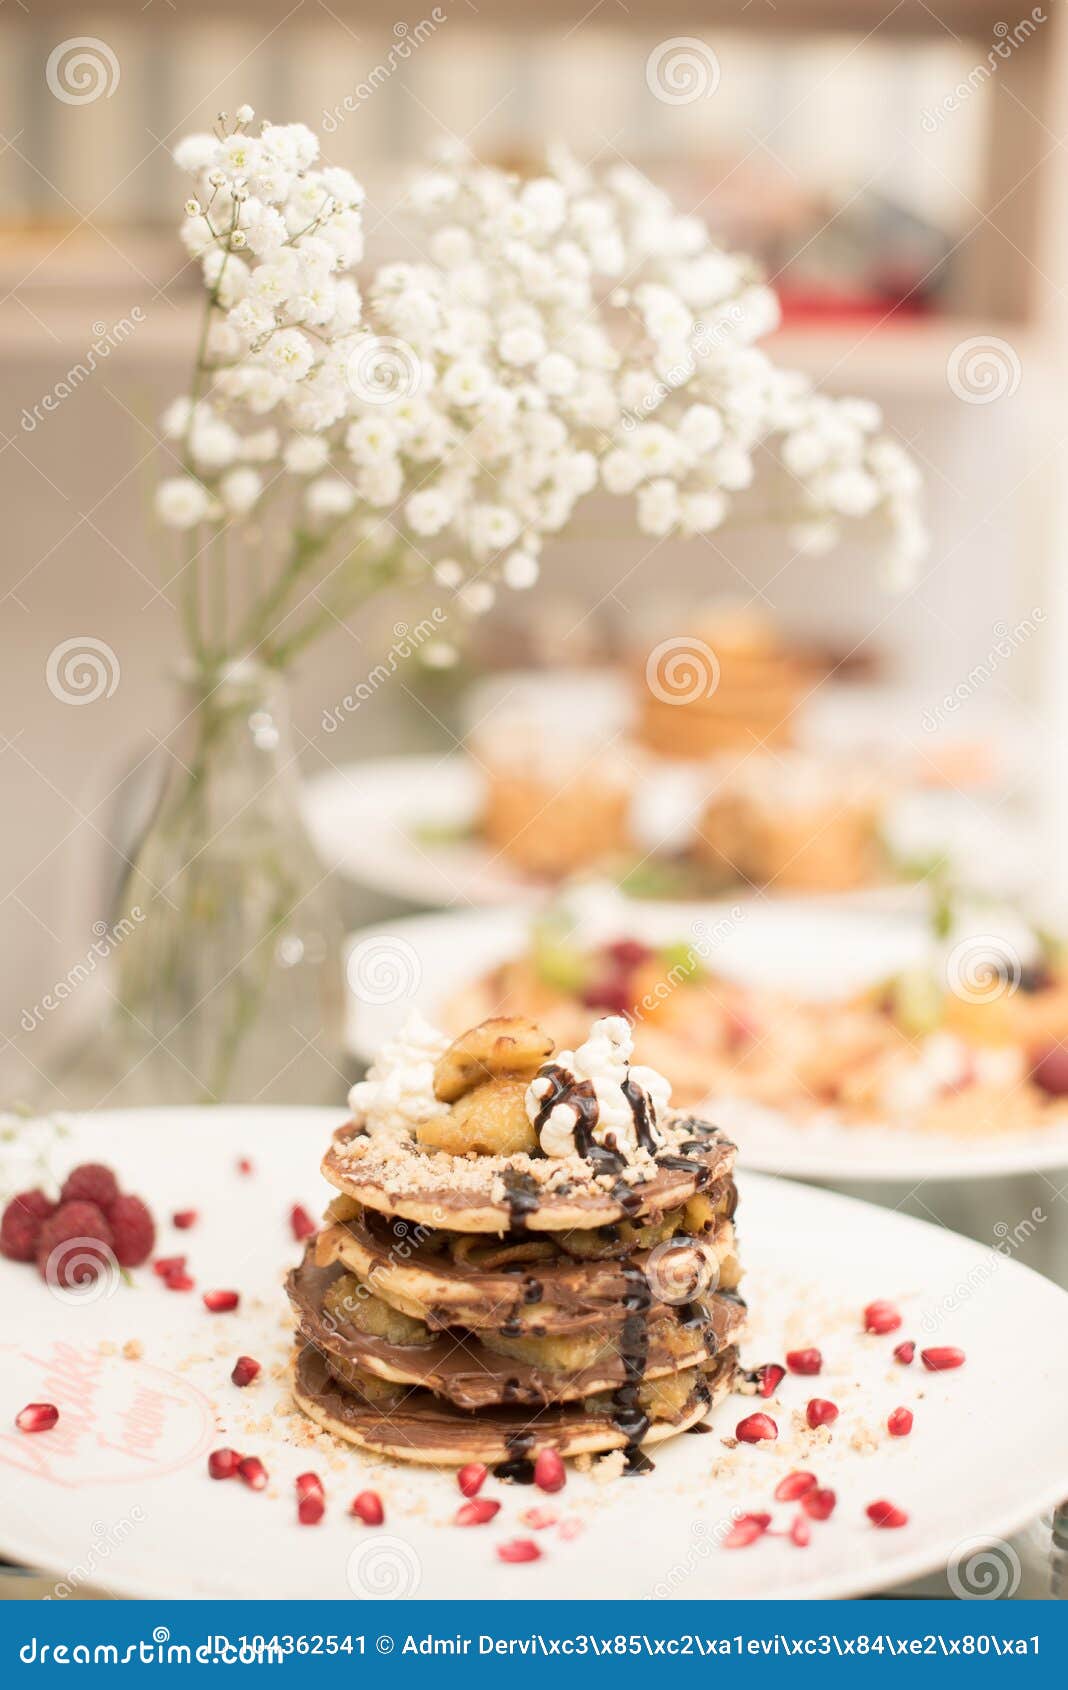 pancakes on plate with decorations